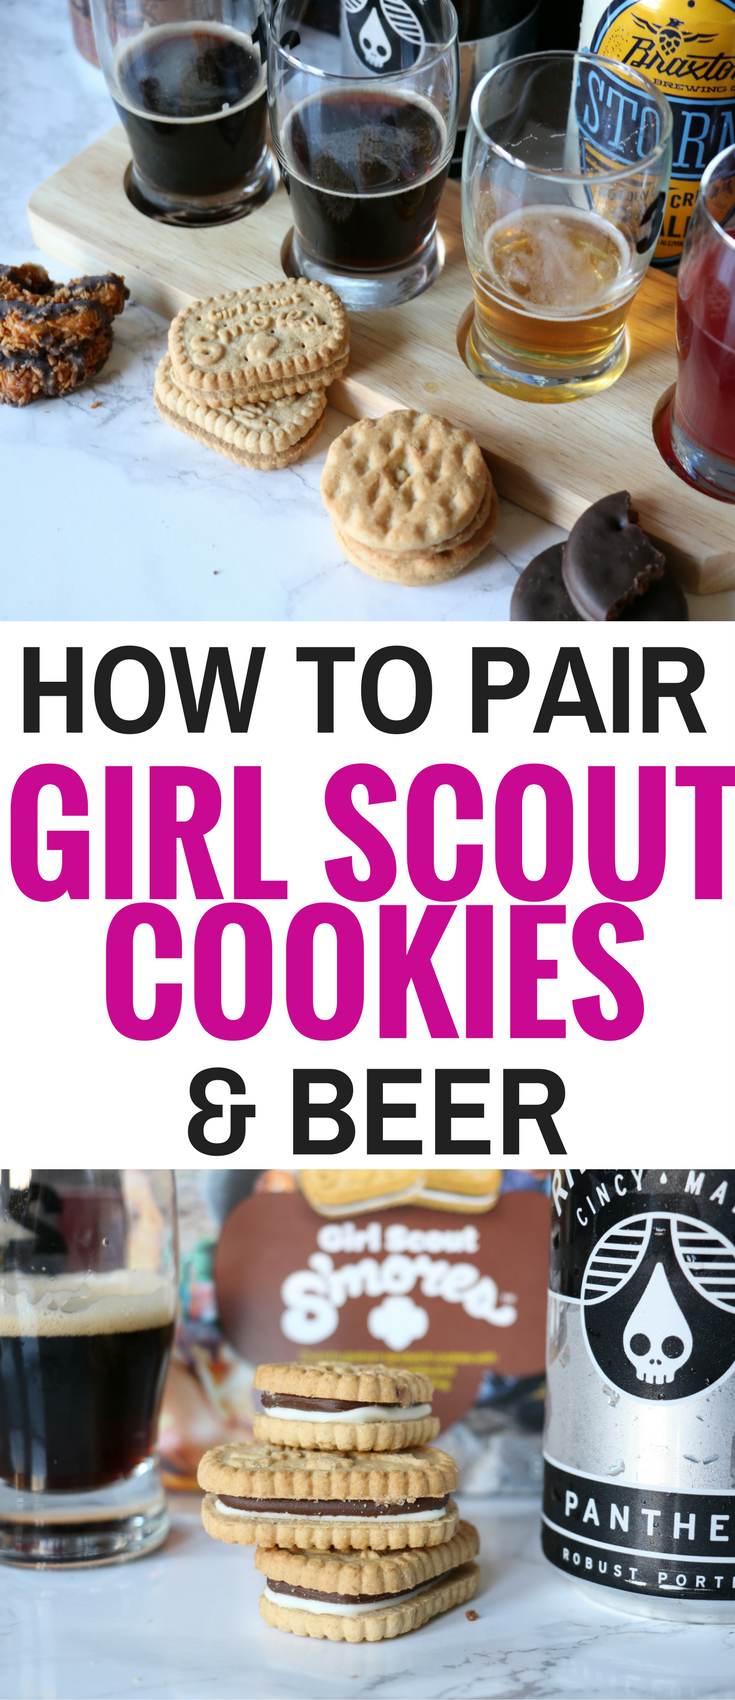 Girl Scout Cookies and Beer Pairing Guide -   24 crafts beer pint
 ideas